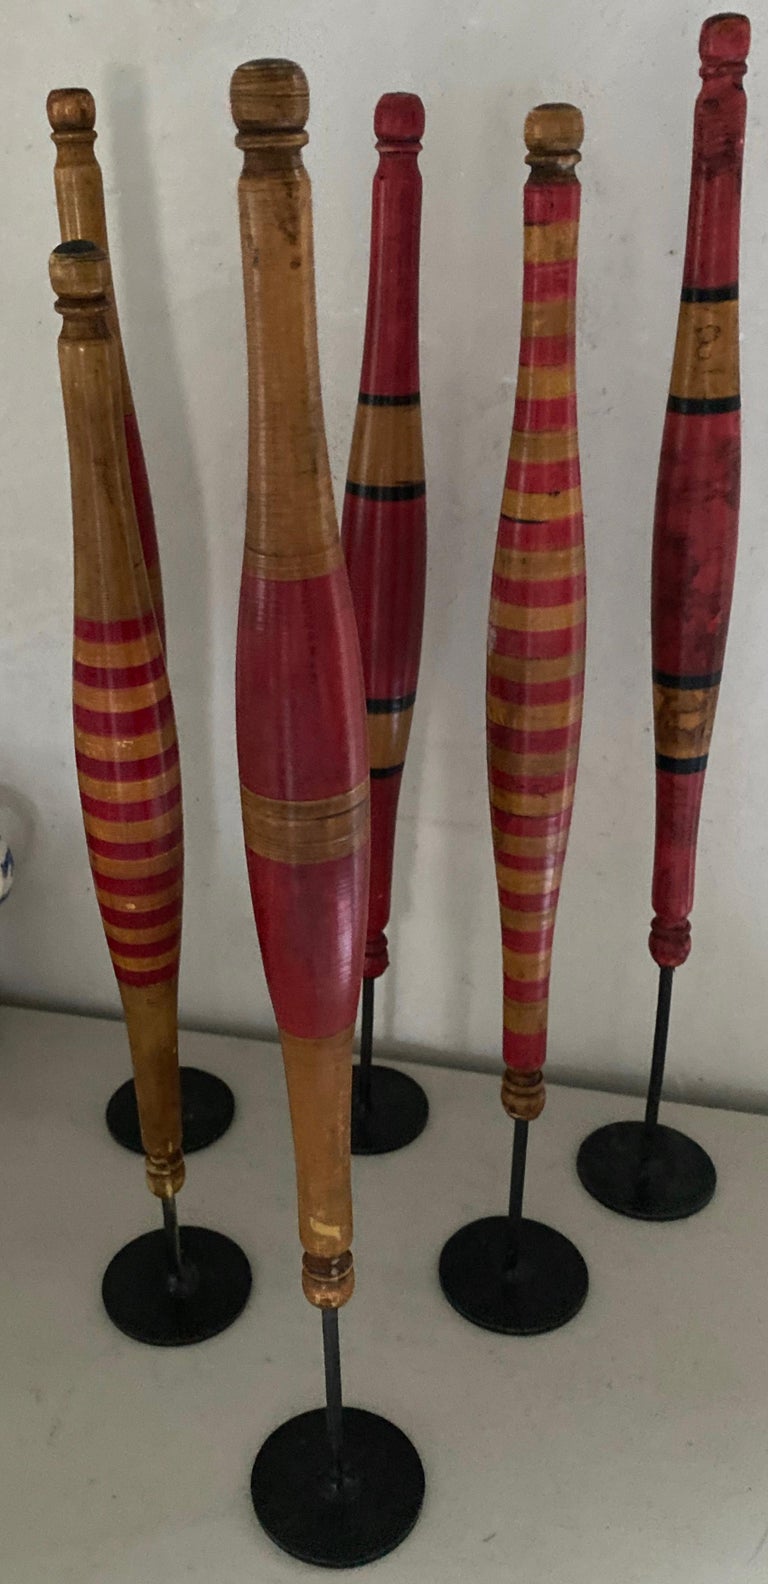 Hand-Carved Antique Wooden Spindles for Spinning Wool For Sale